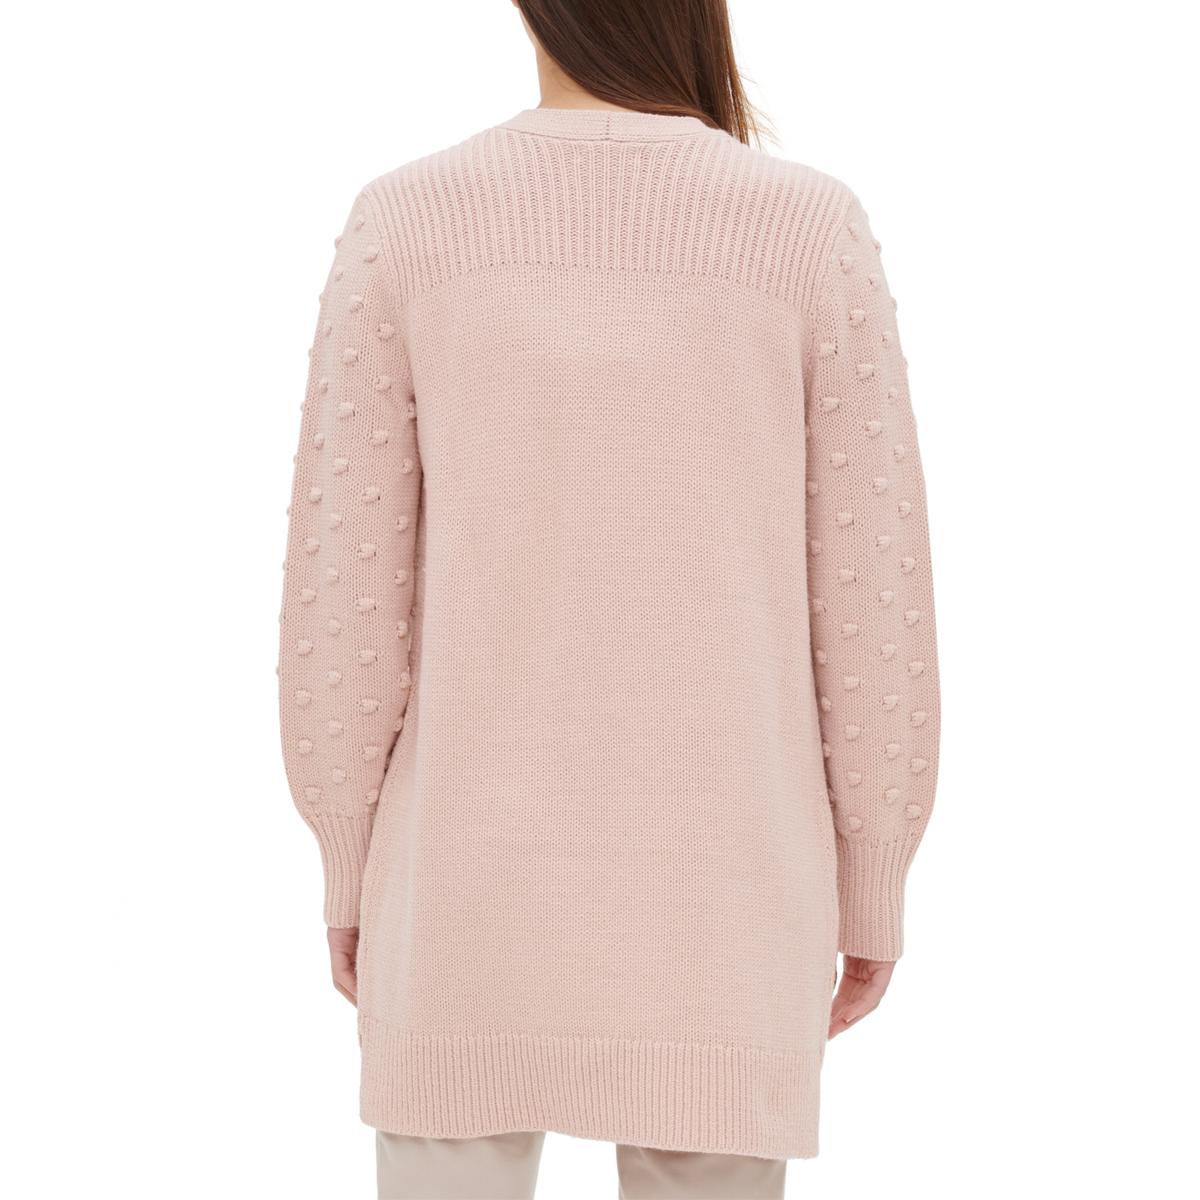 Calvin Klein Womens Pink Open Front Duster Cardigan Sweater Top L BHFO ...